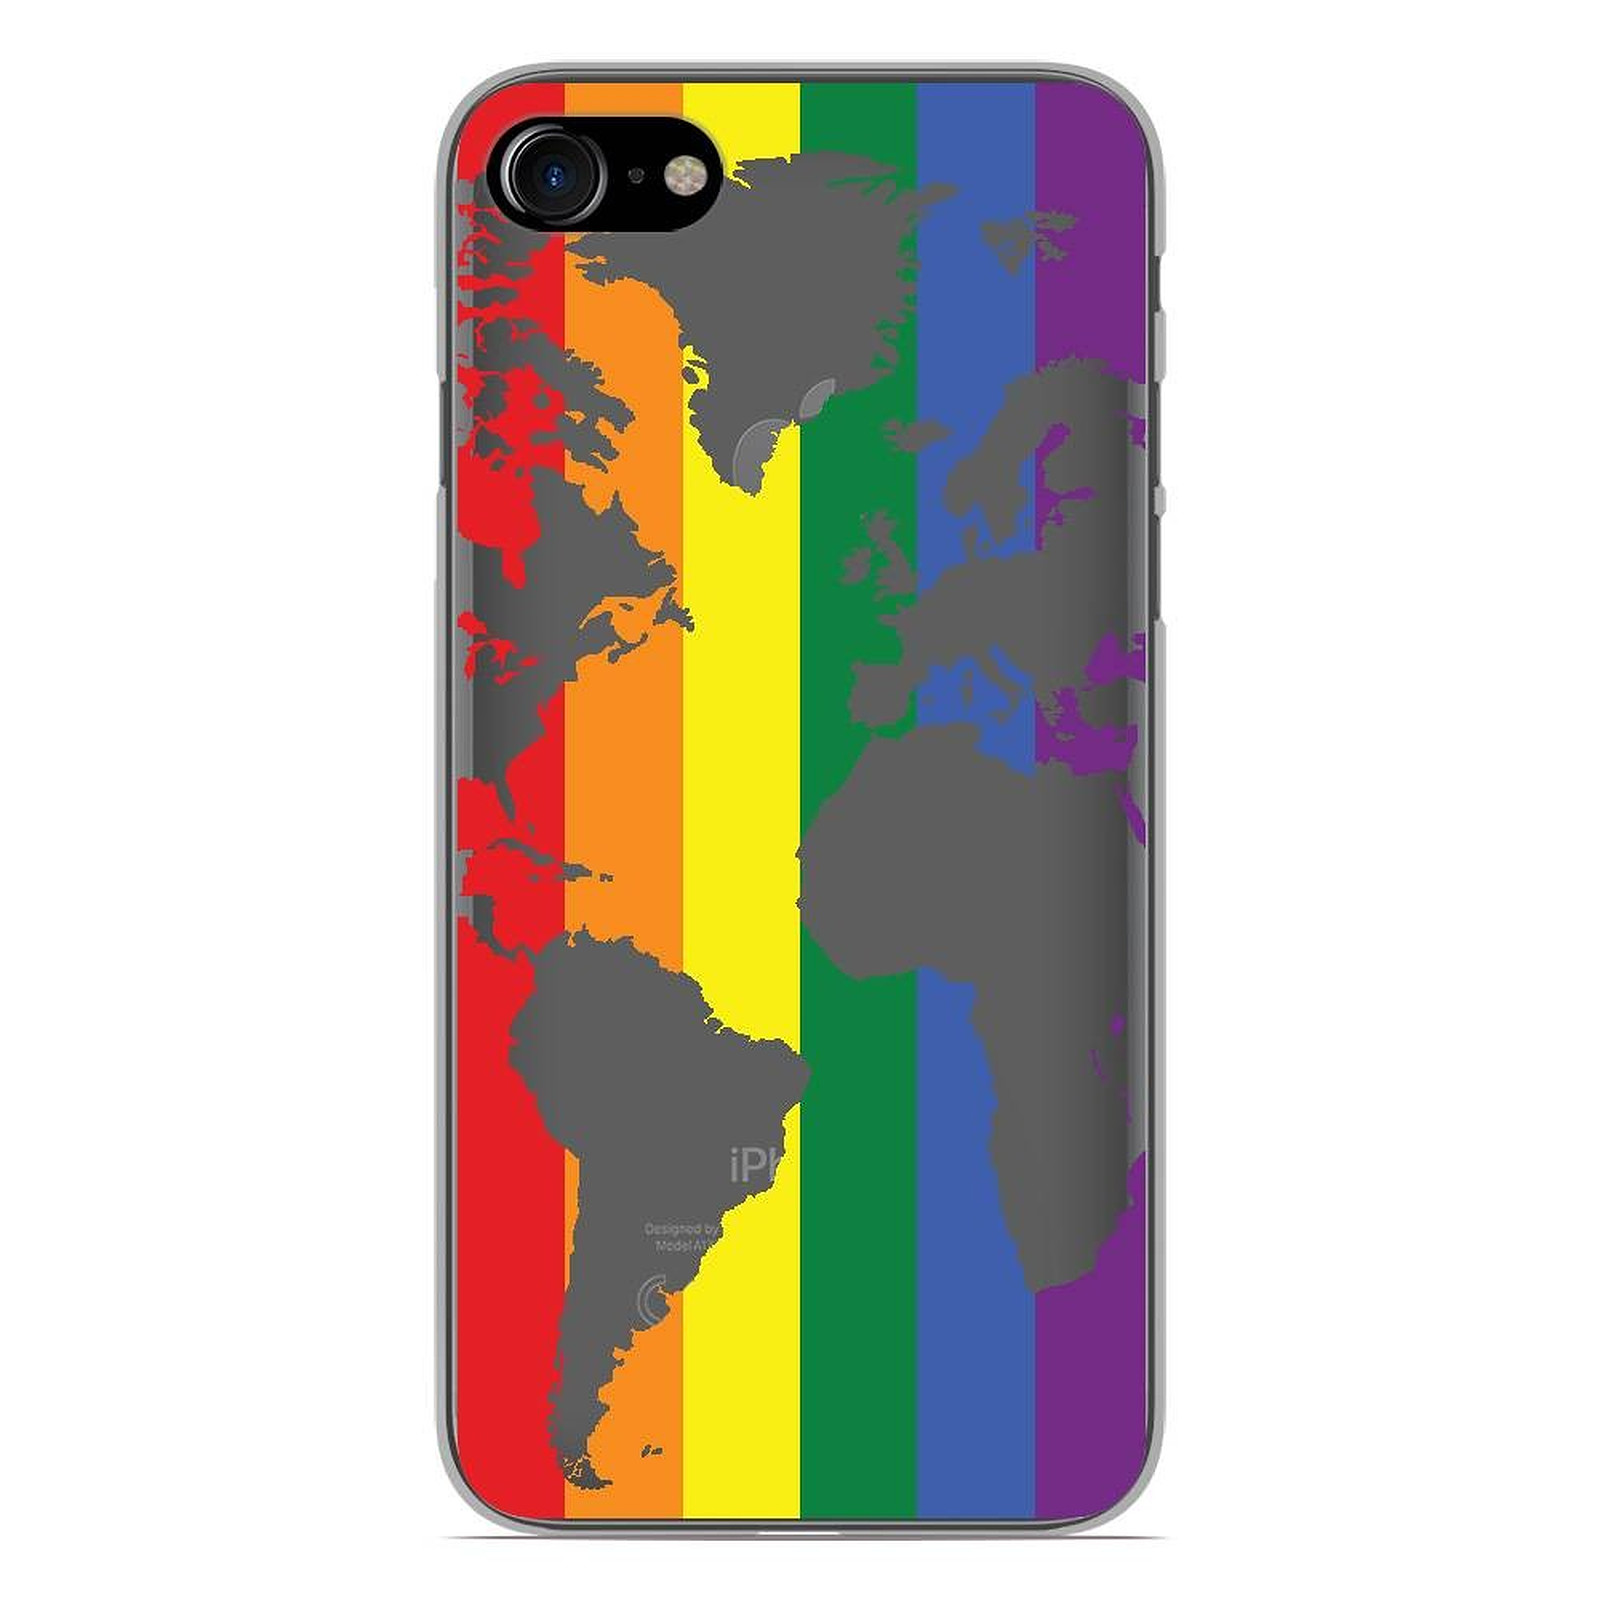 1001 Coques Coque silicone gel Apple iPhone 8 motif Map LGBT - Coque telephone 1001Coques